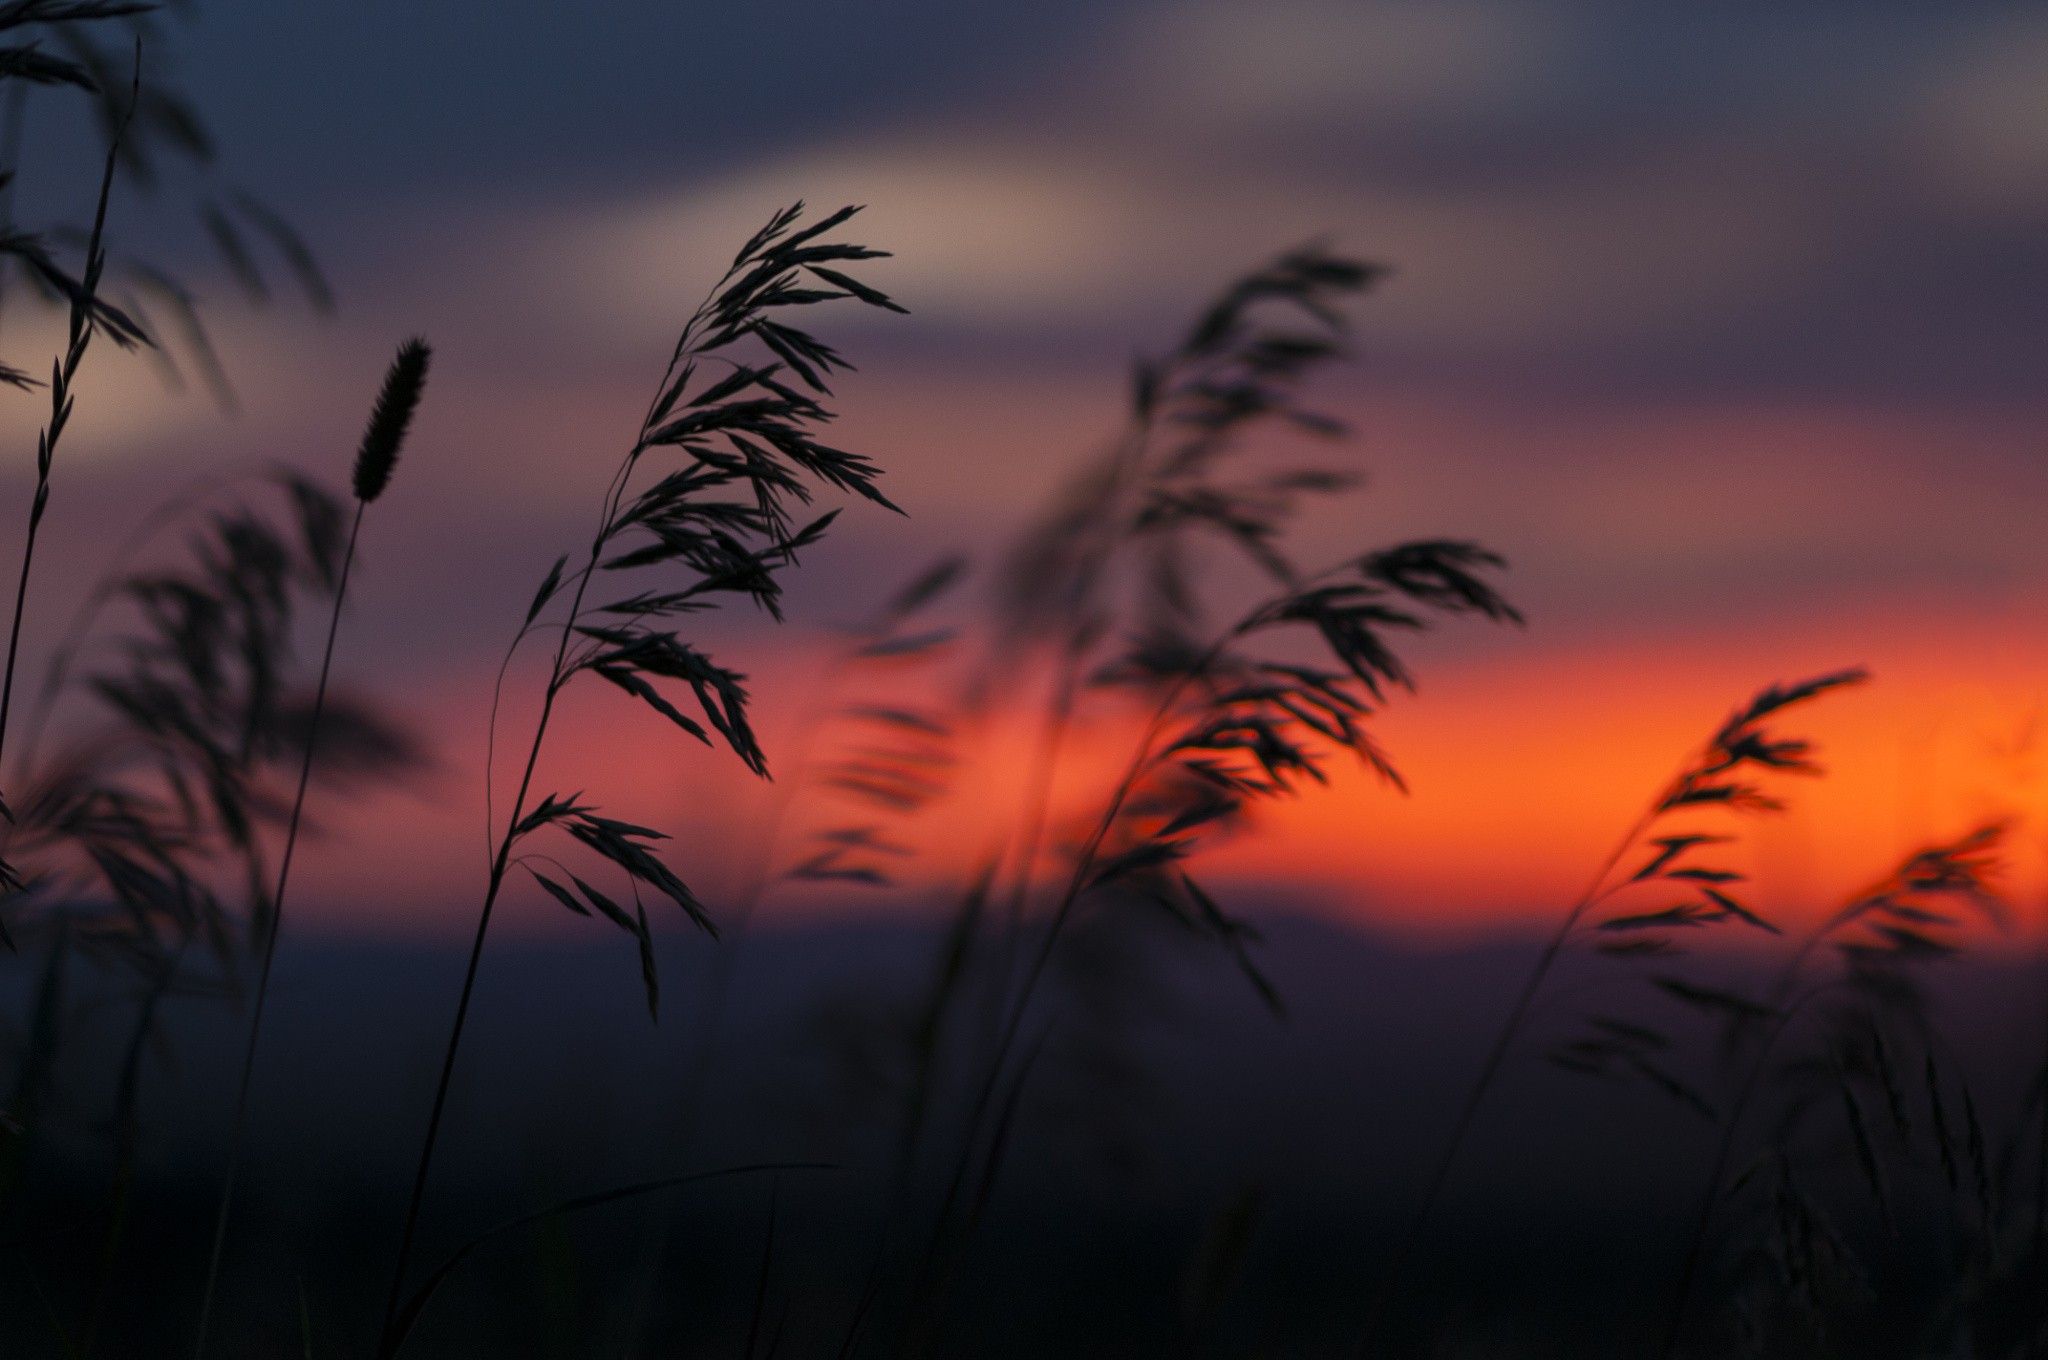 General 2048x1360 plants sunset silhouette reeds nature low light